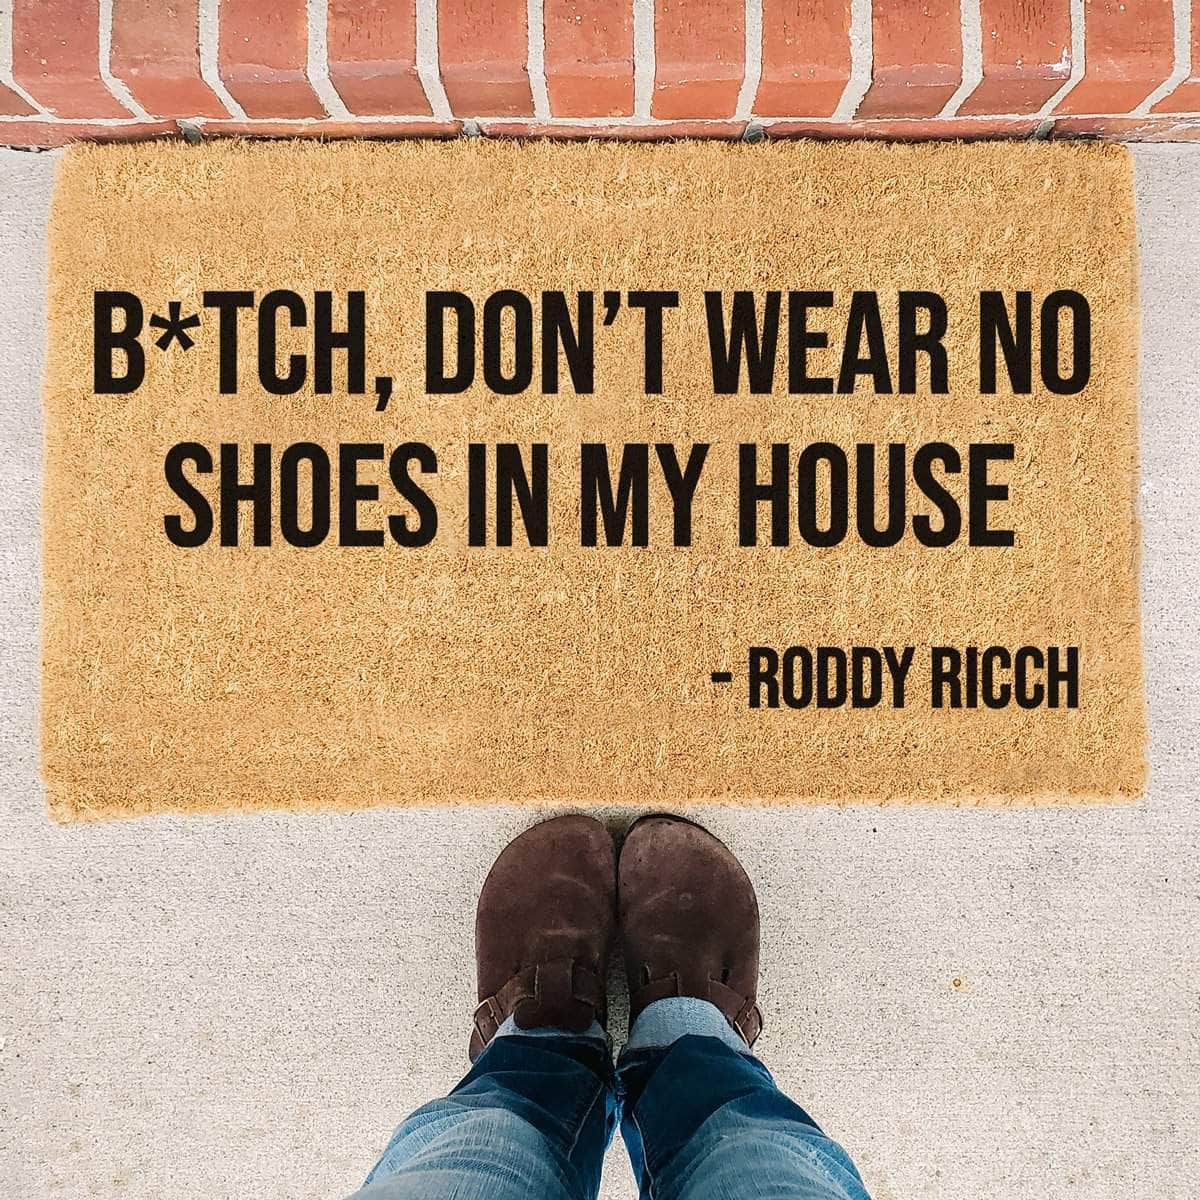 Bold b*tch don't wear no shoes in my house - Roddy Ricch Mat